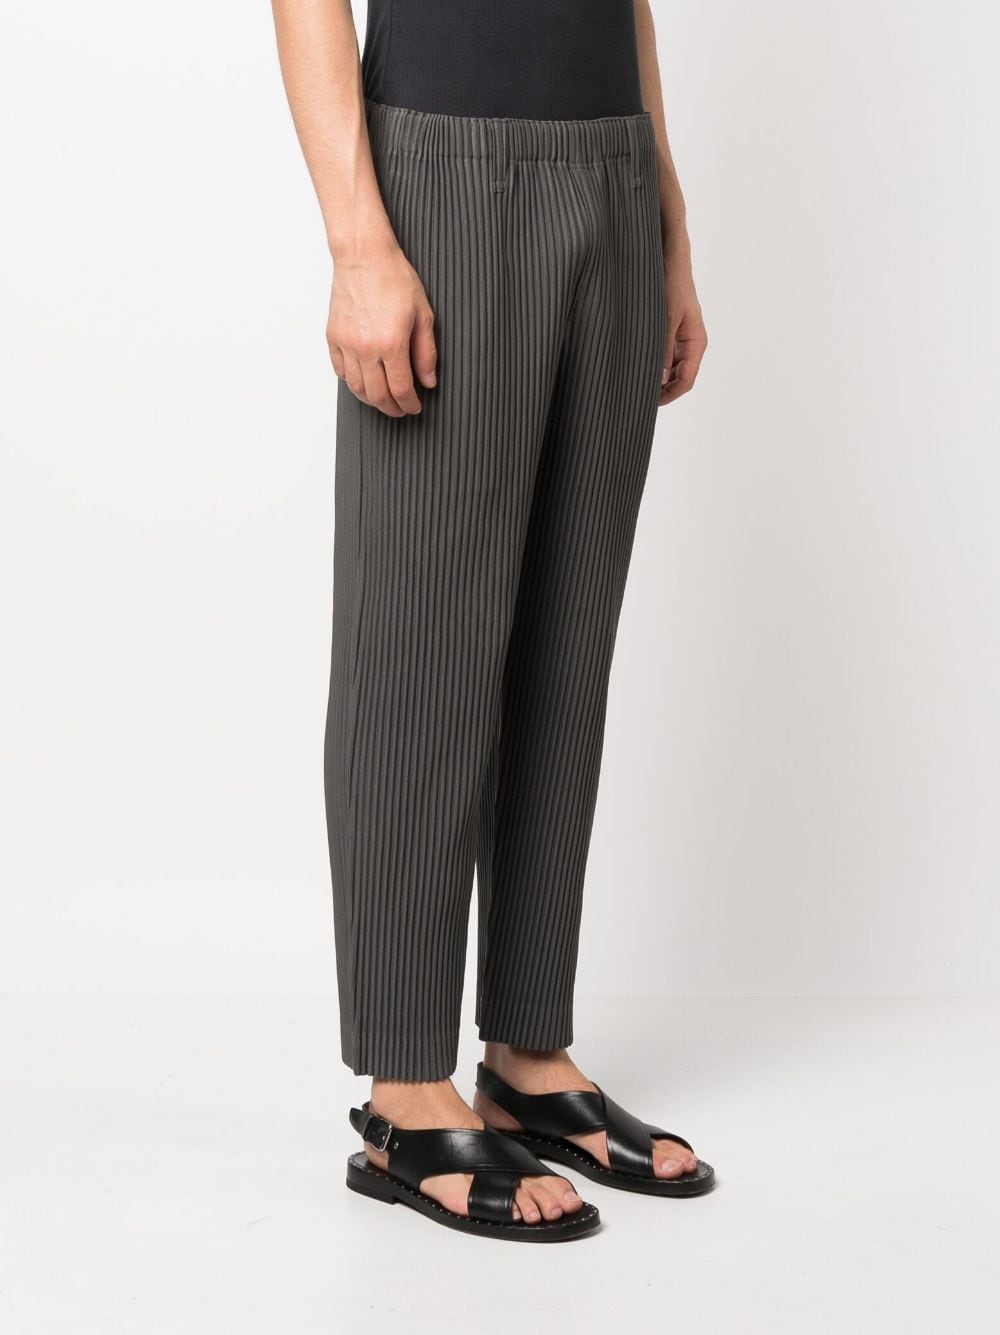 Grey Basics Pleated Trousers by Homme Plissé Issey Miyake on Sale